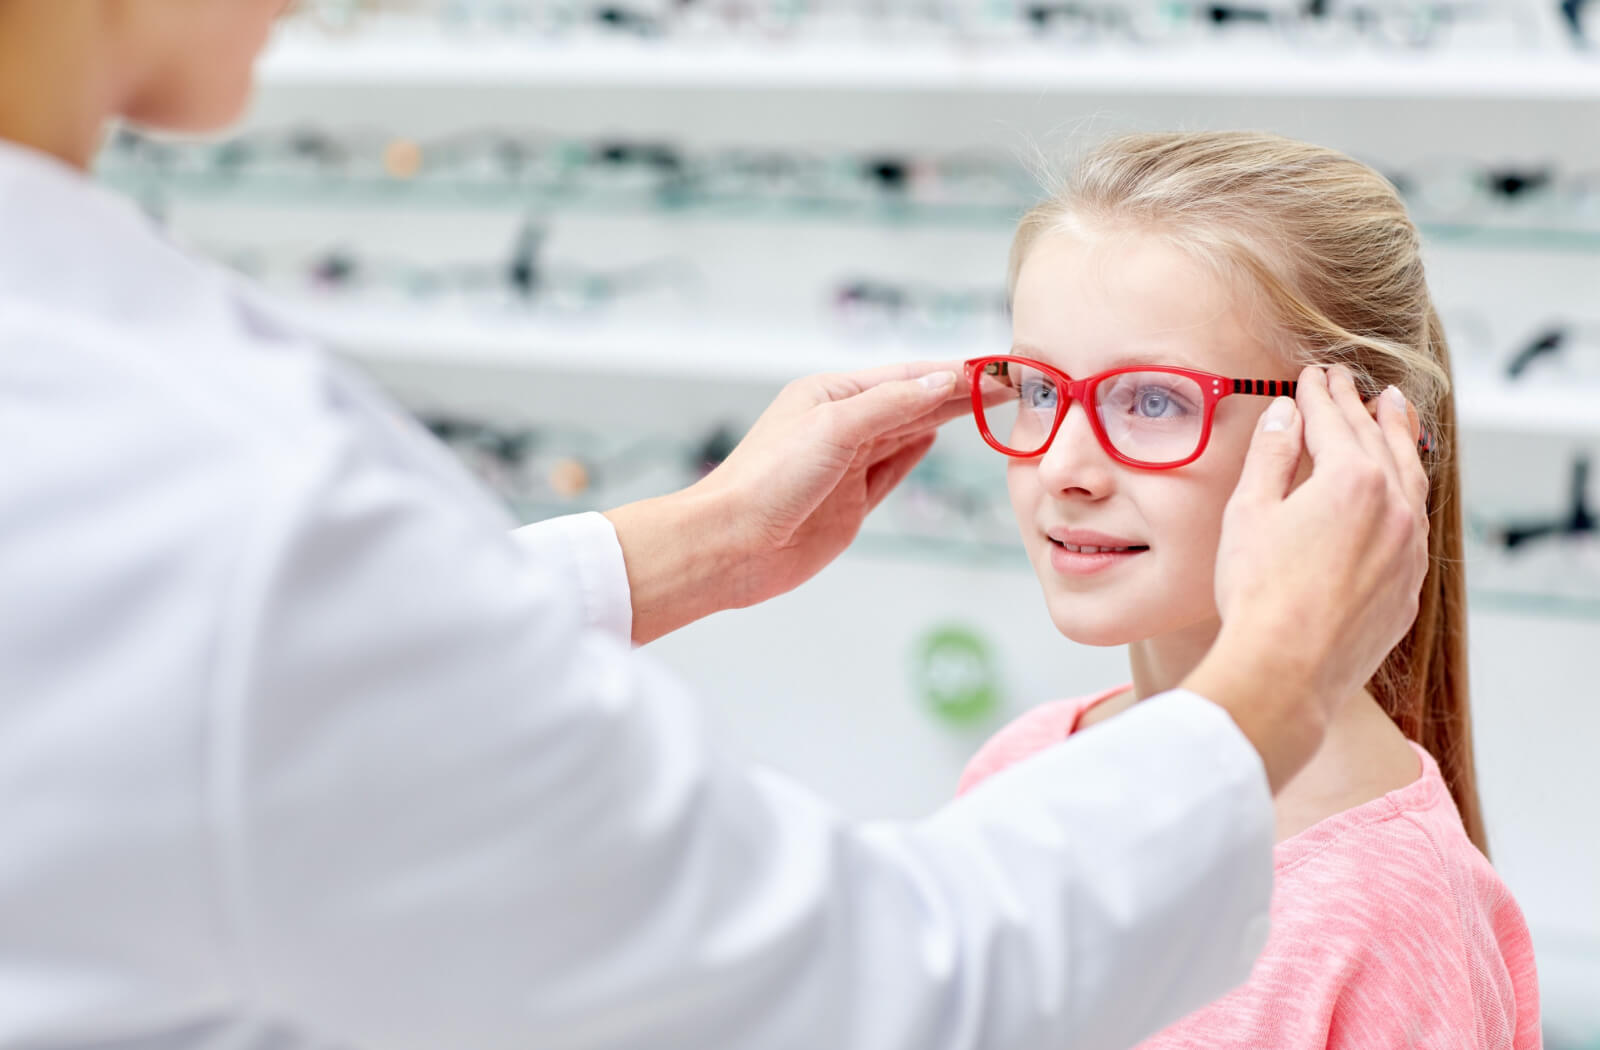 A child smiling and trying on glasses in an optical clinic while being assisted by an optometrist